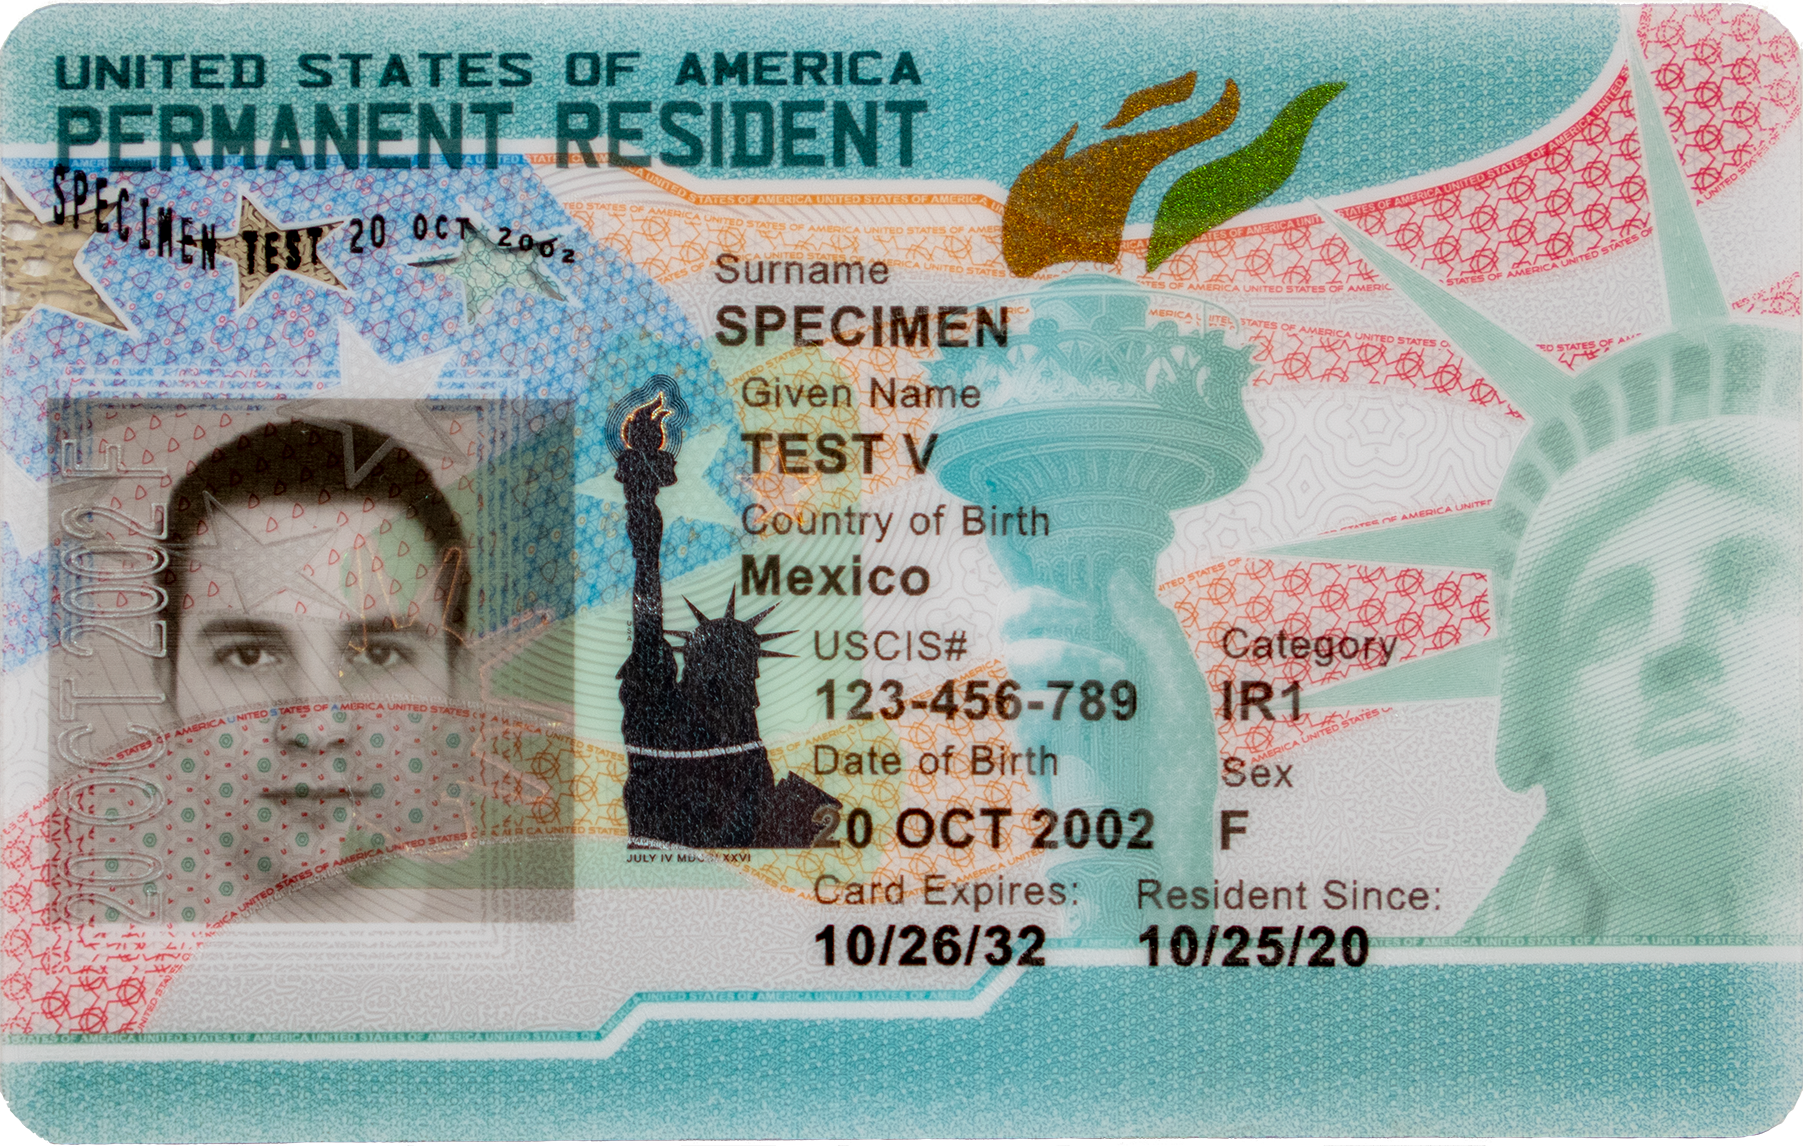 Image of the front of a Permanent Resident Card